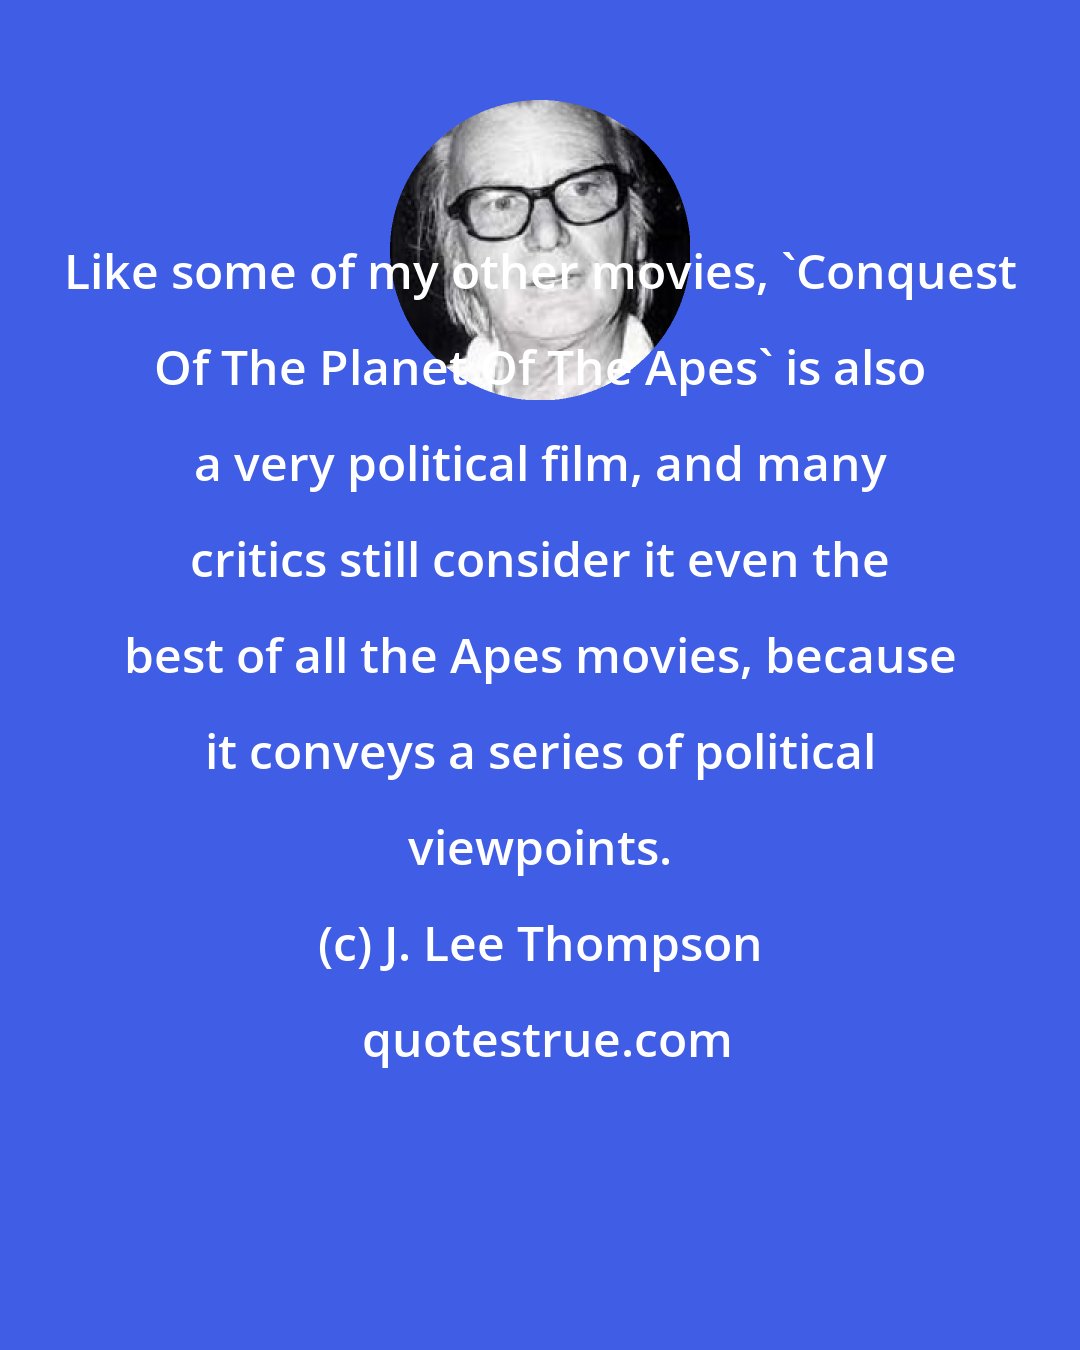 J. Lee Thompson: Like some of my other movies, 'Conquest Of The Planet Of The Apes' is also a very political film, and many critics still consider it even the best of all the Apes movies, because it conveys a series of political viewpoints.